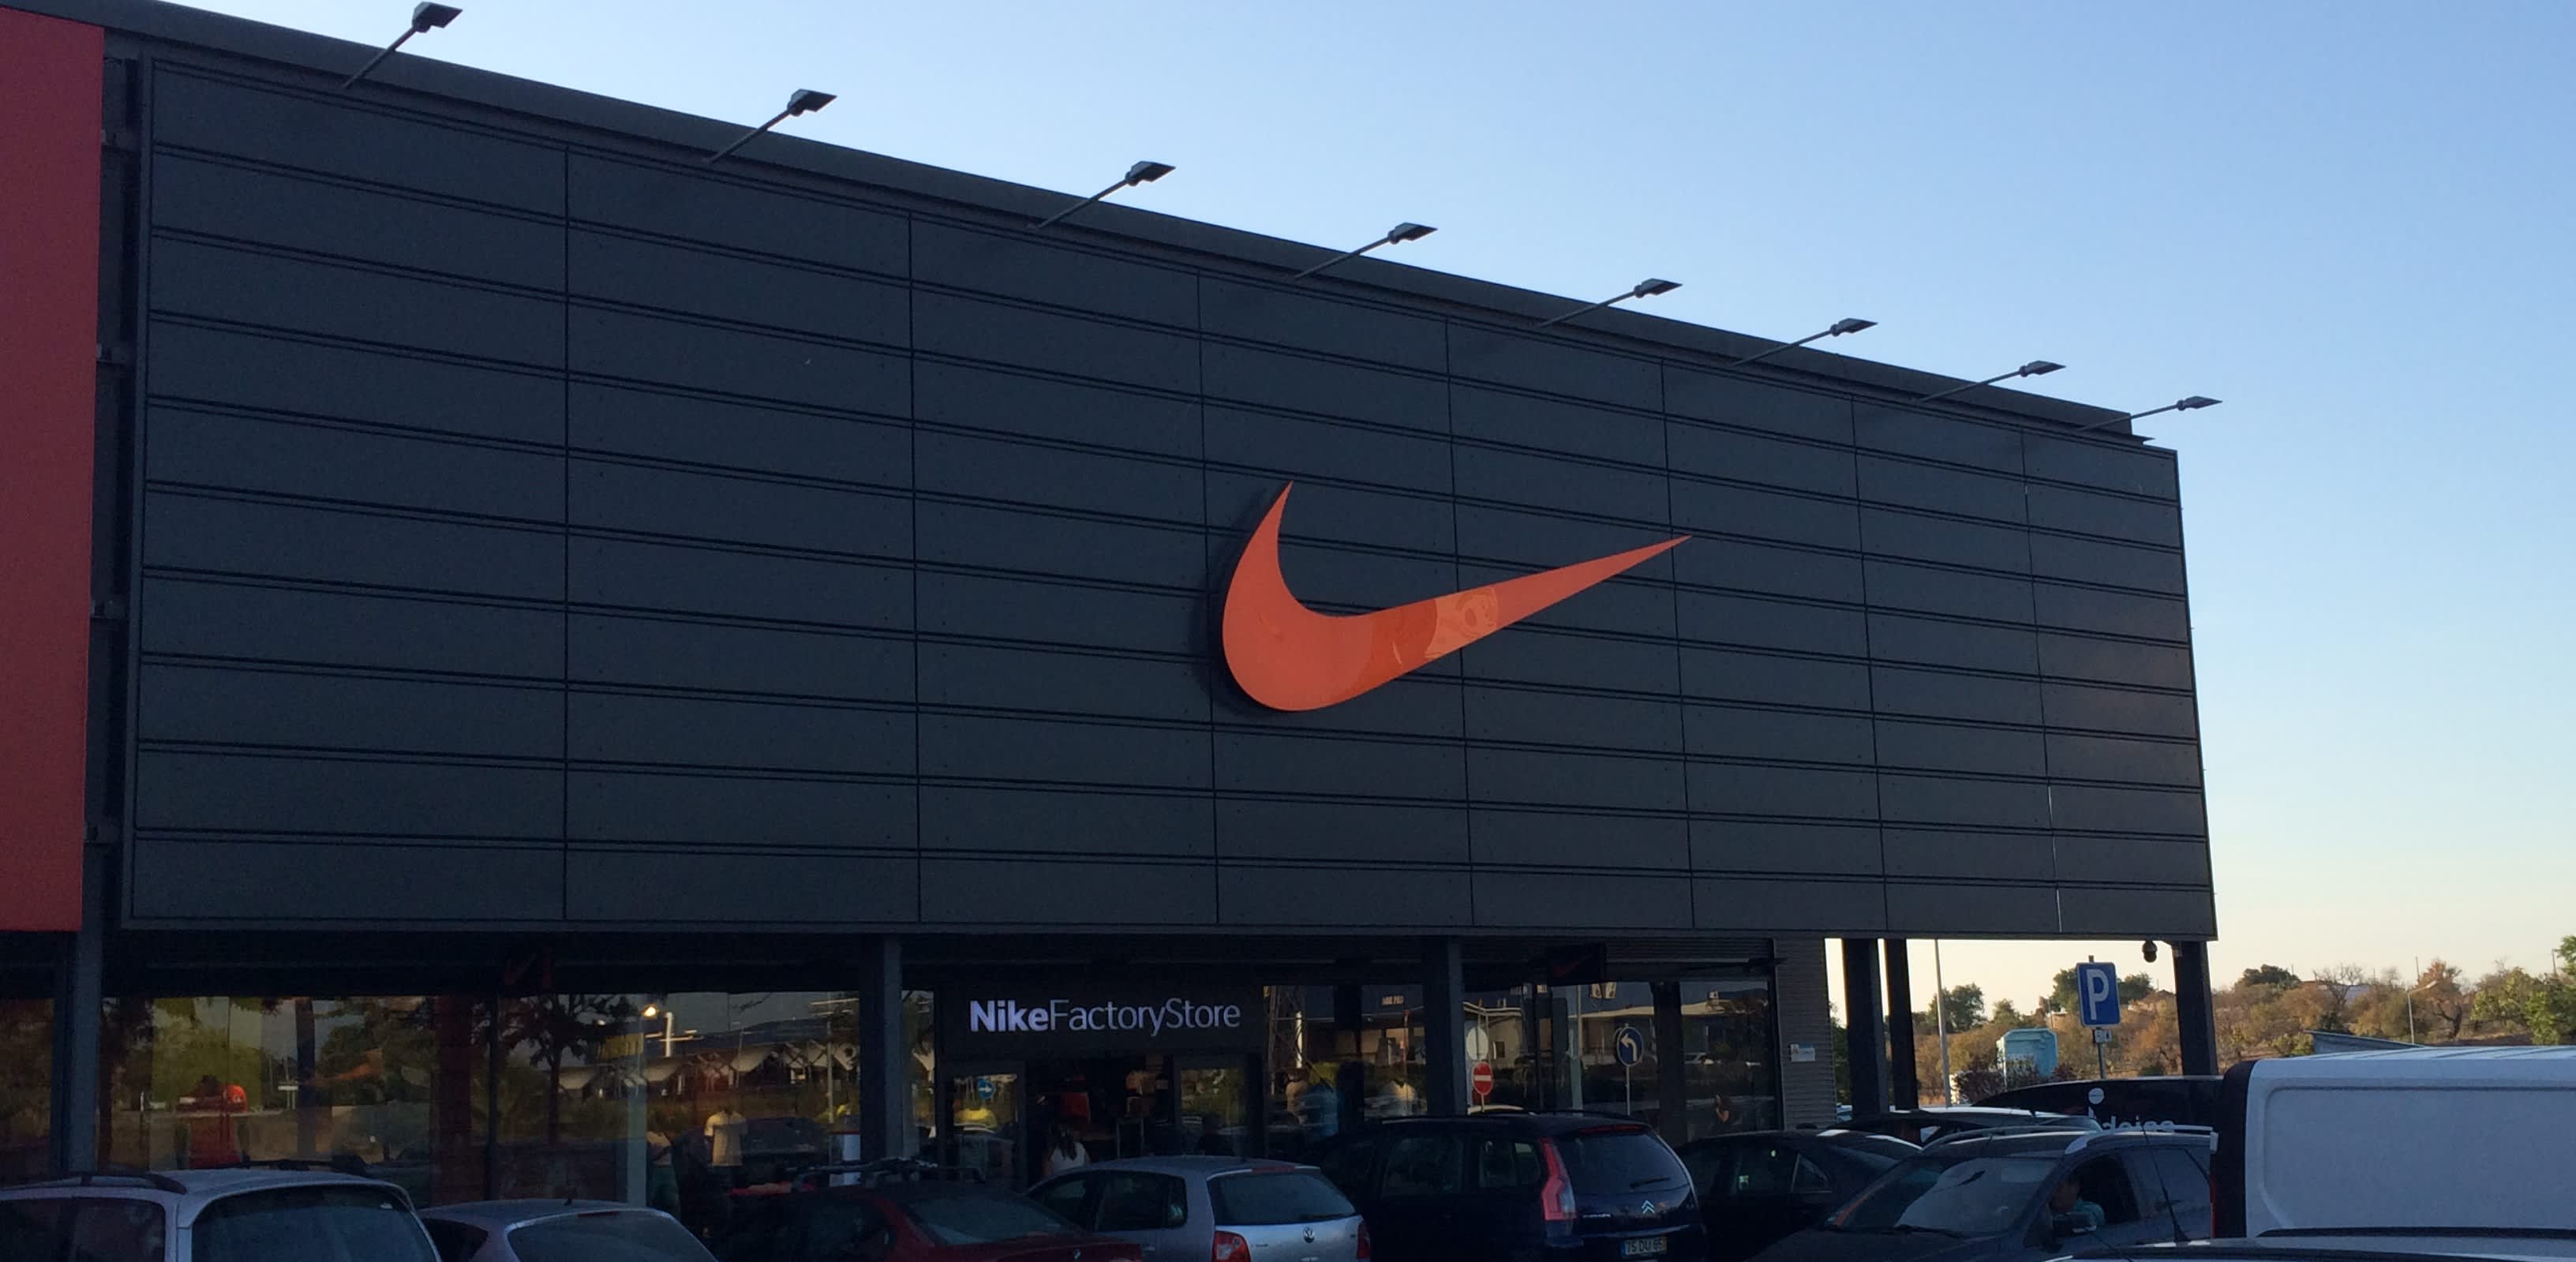 Stores in Nike.com